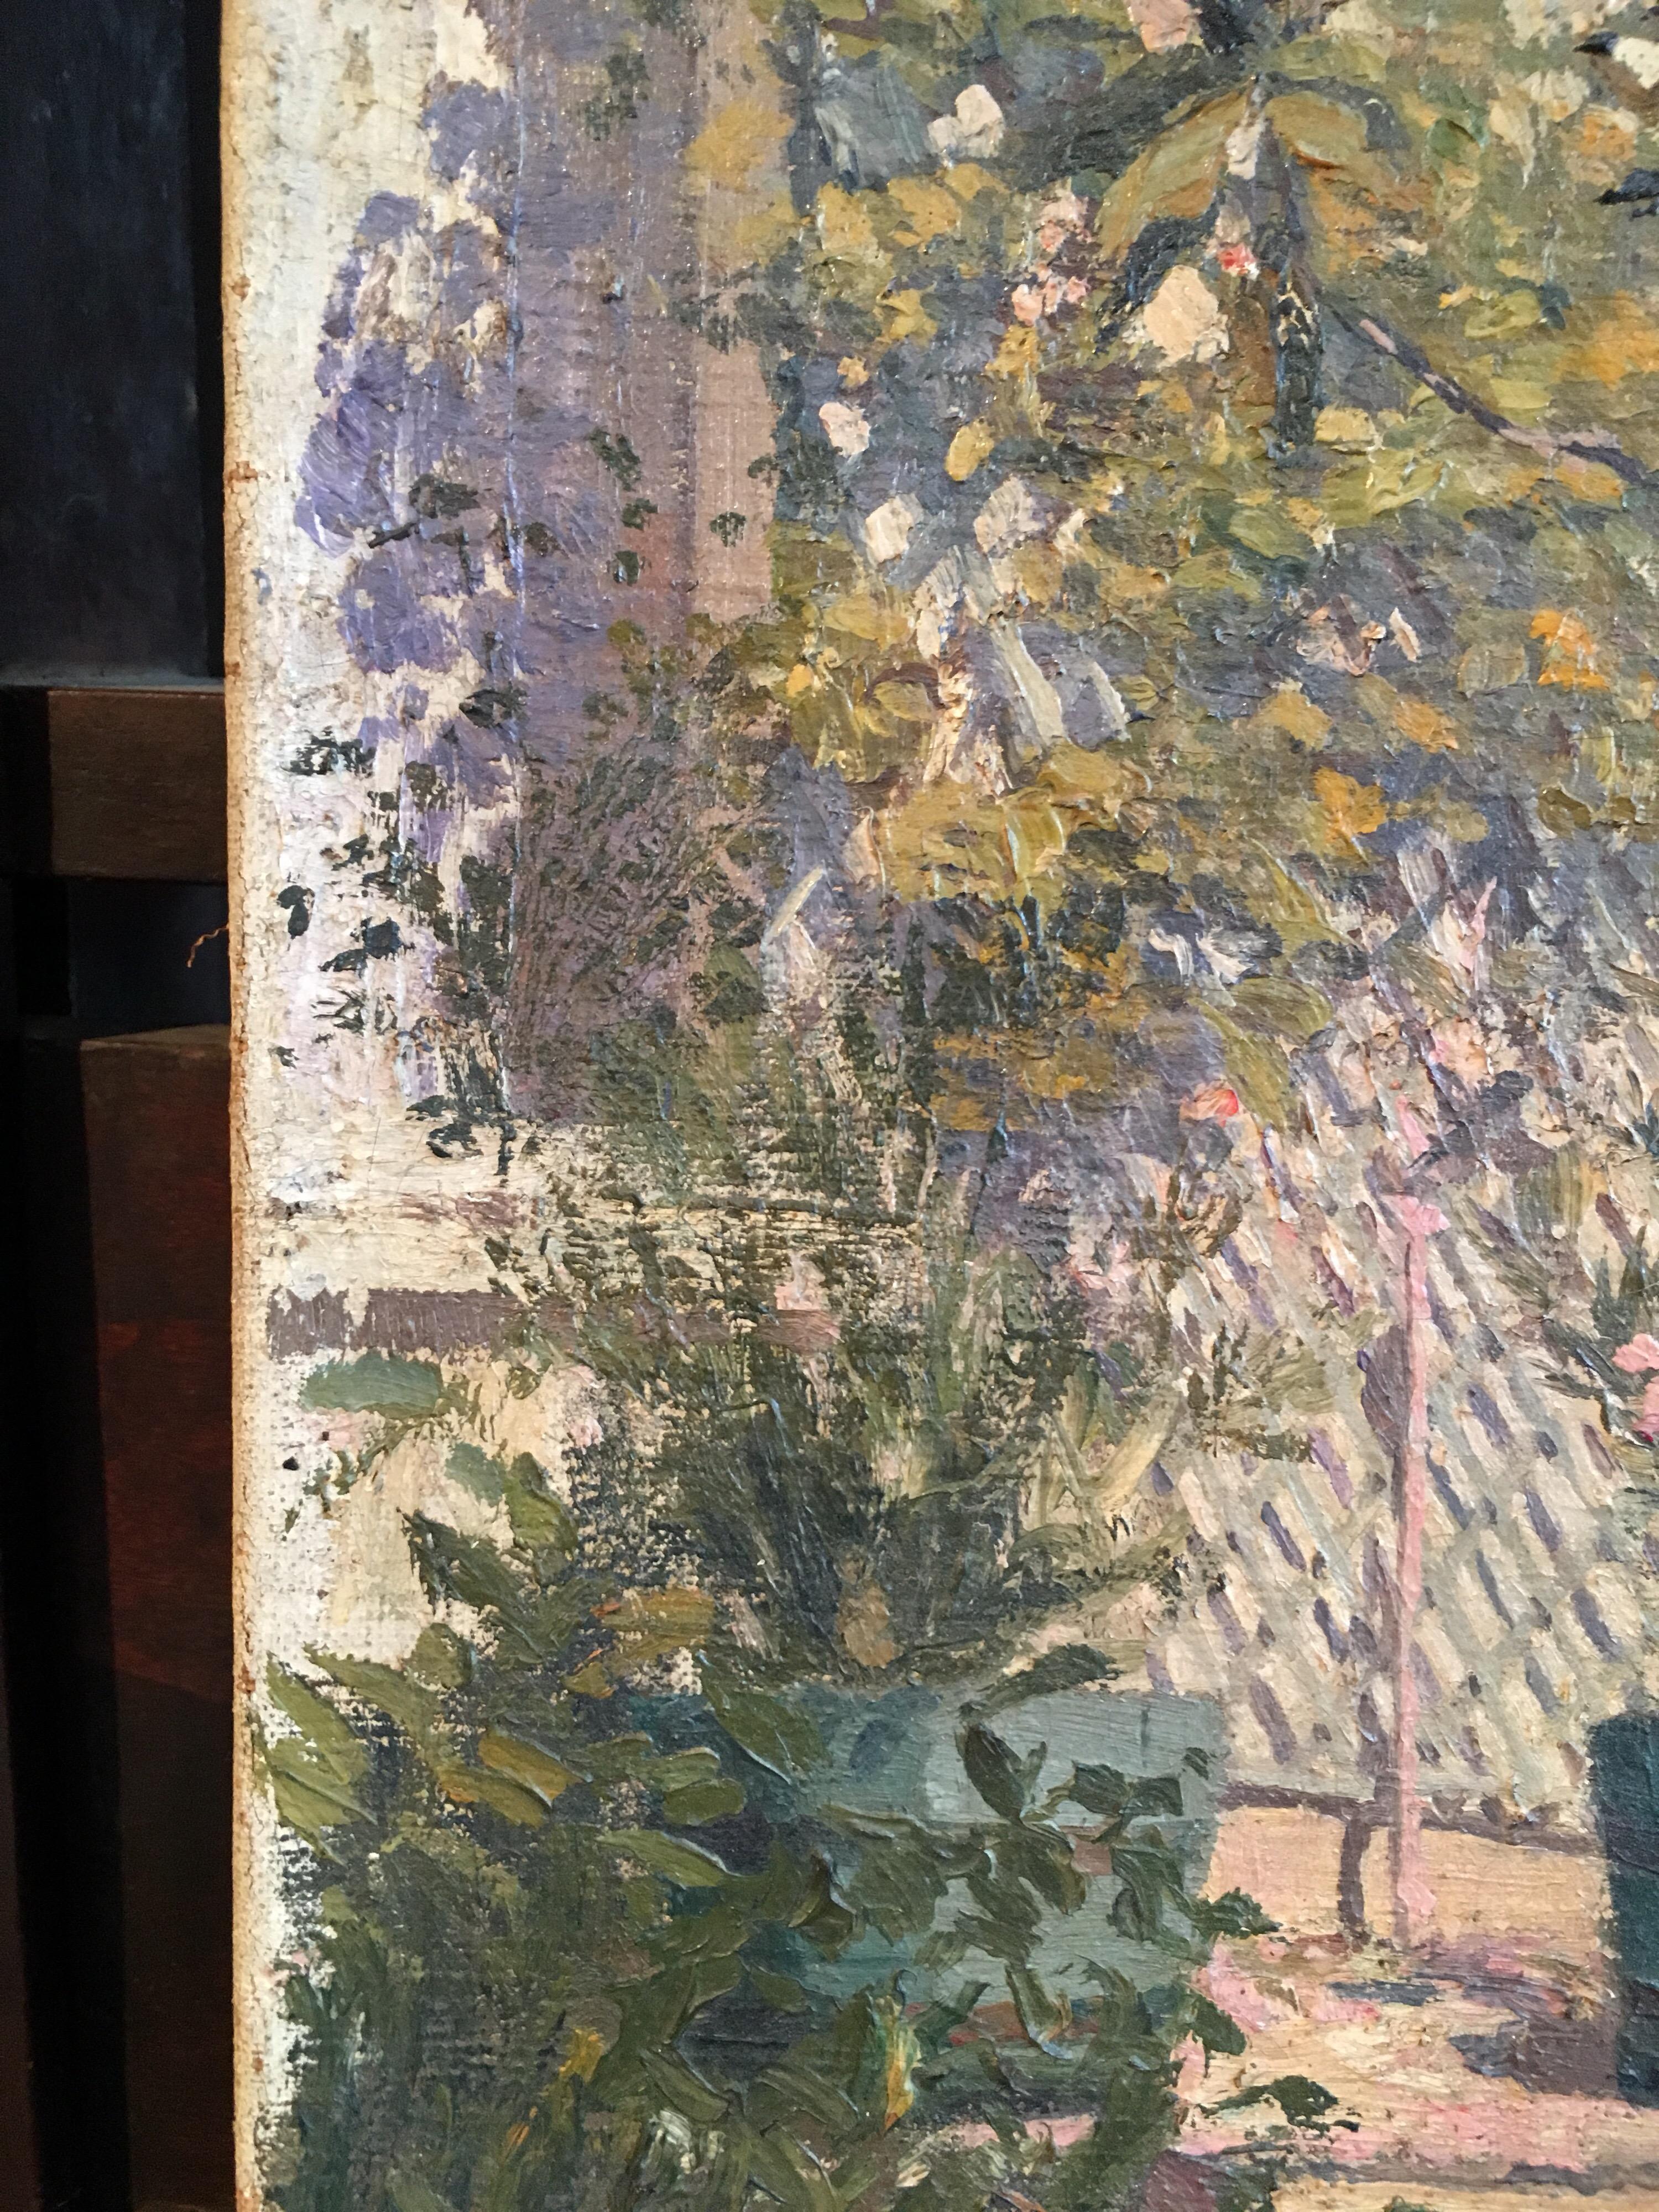 ‘Le Jardin’, Impressionist Landscape of Garden in France, Oil Painting, Signed
By French artist Georges Faure, early 20th Century
Signed and dated '(19)05' by the artist on the lower right hand corner
Oil painting on canvas, unframed
Canvas size: